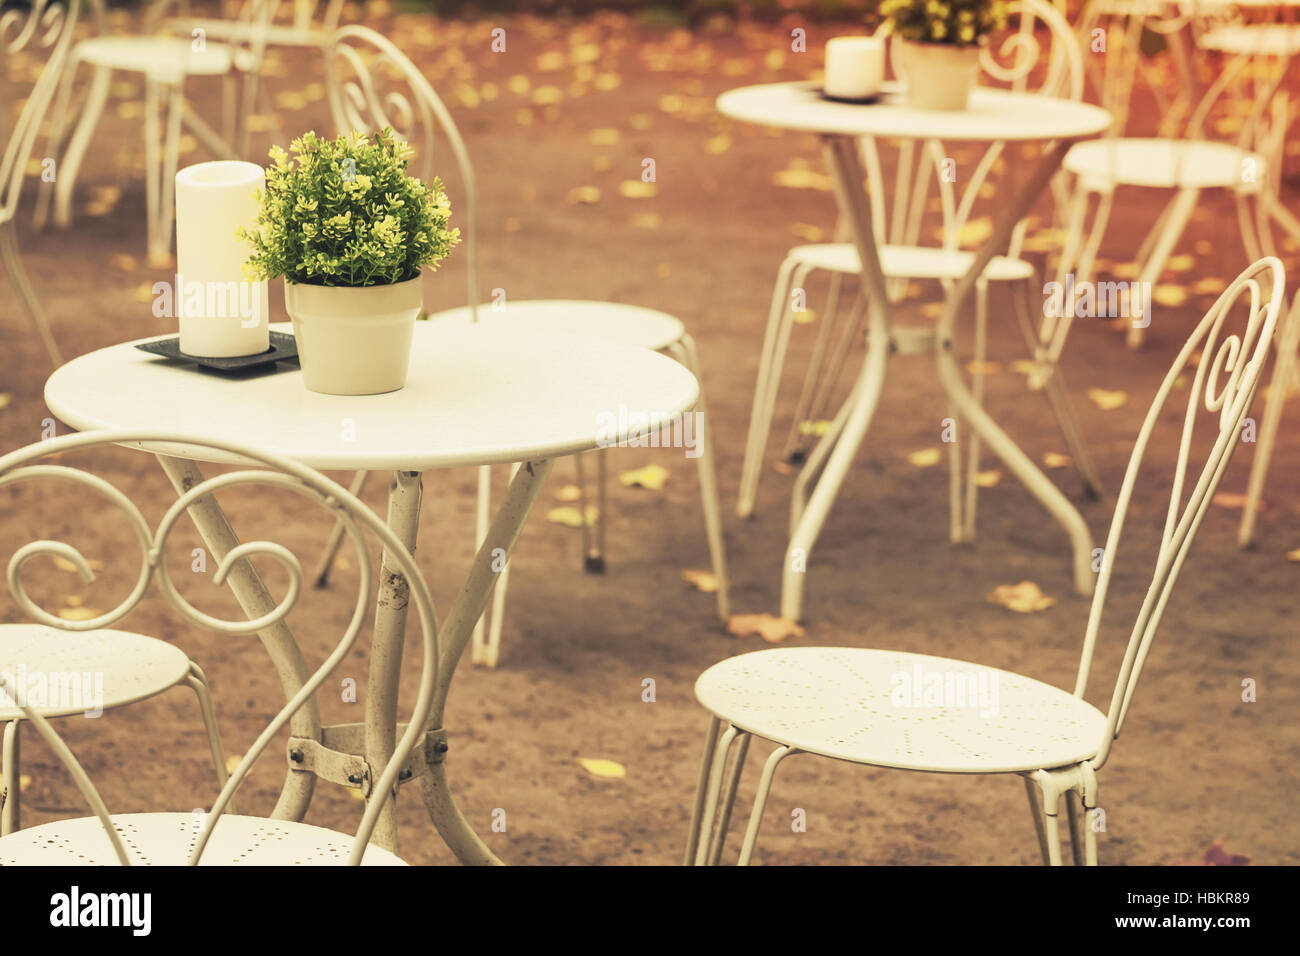 Outdoor cafeteria background interior, metal white chairs and tables with decorative green plants in pots and candles, vintage stylized photo, warm to Stock Photo